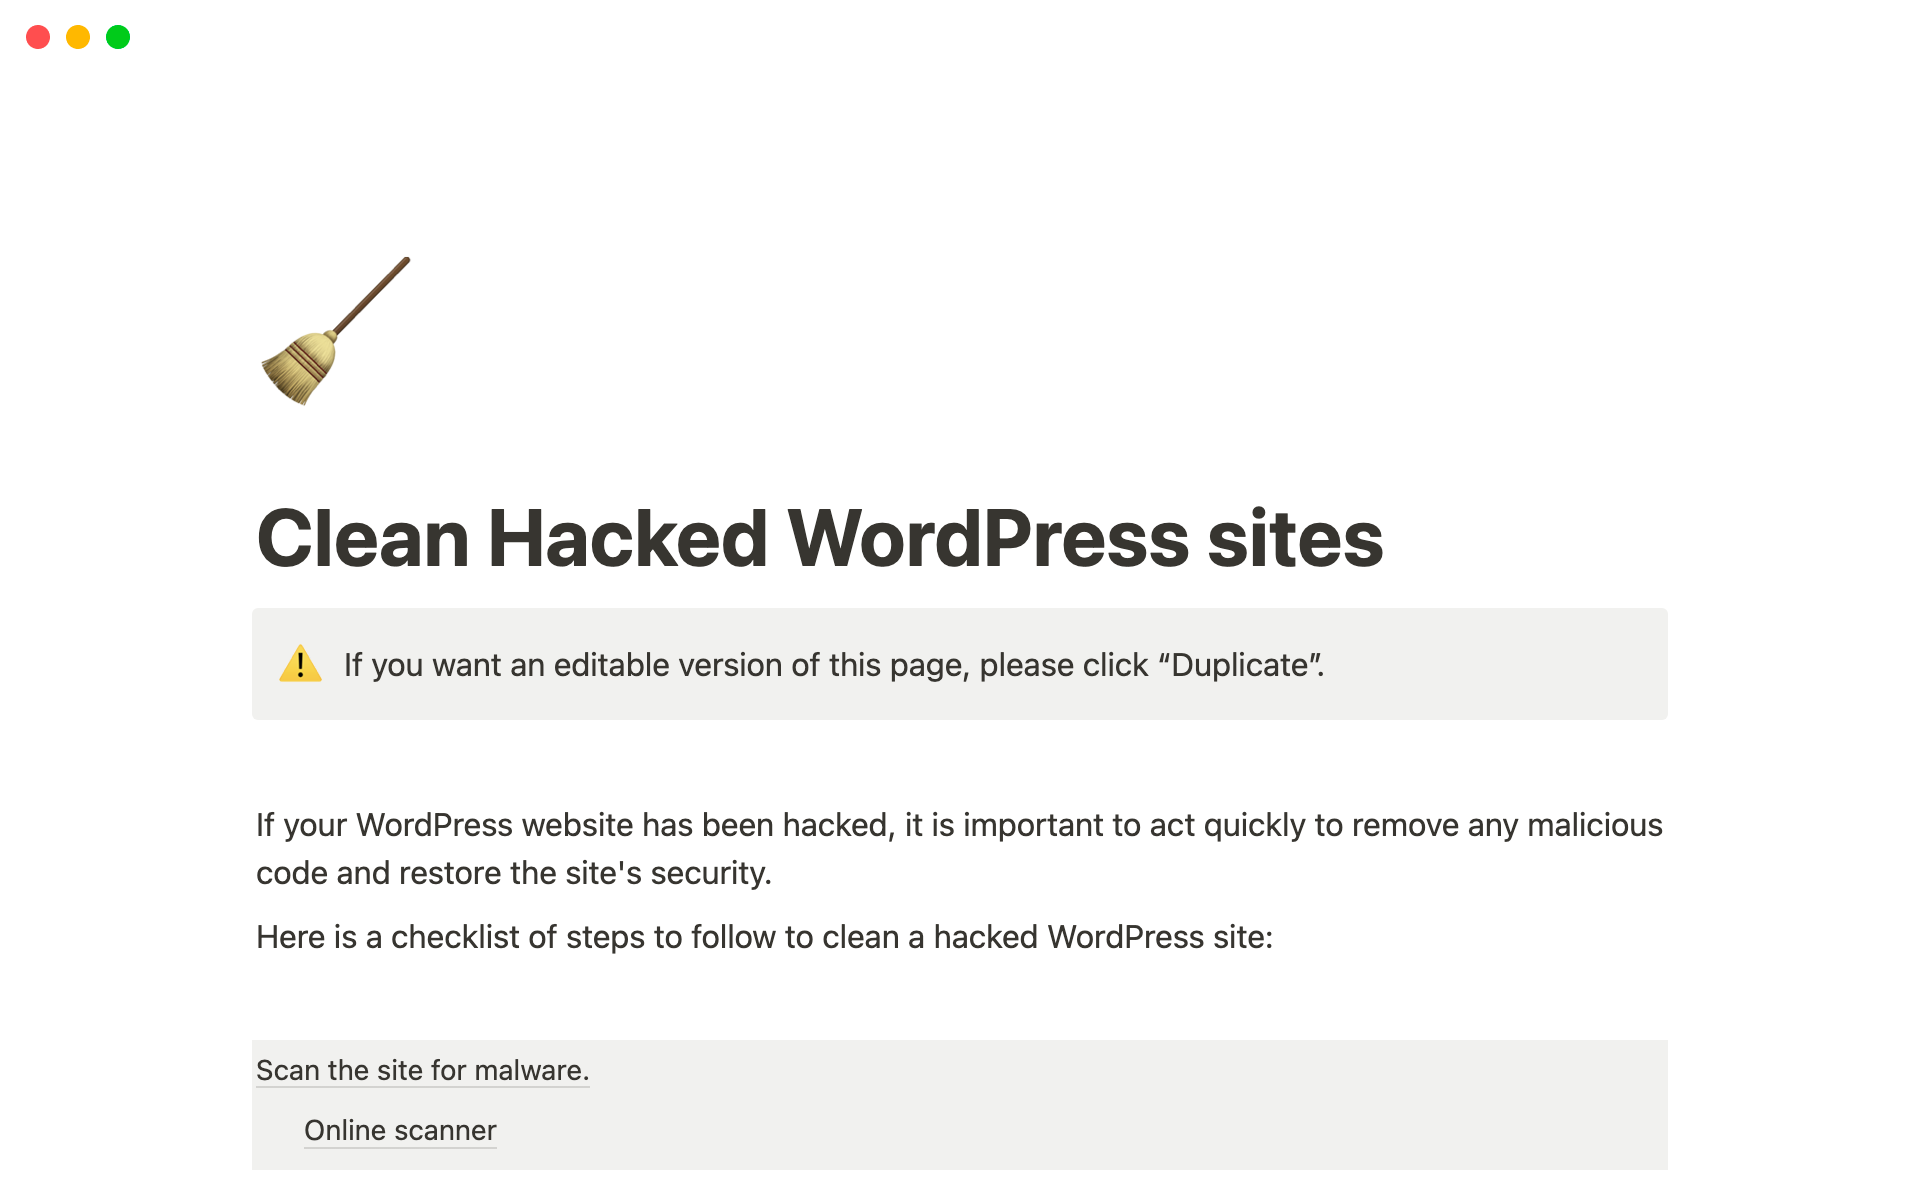 A checklist to clean hacked WordPress sites